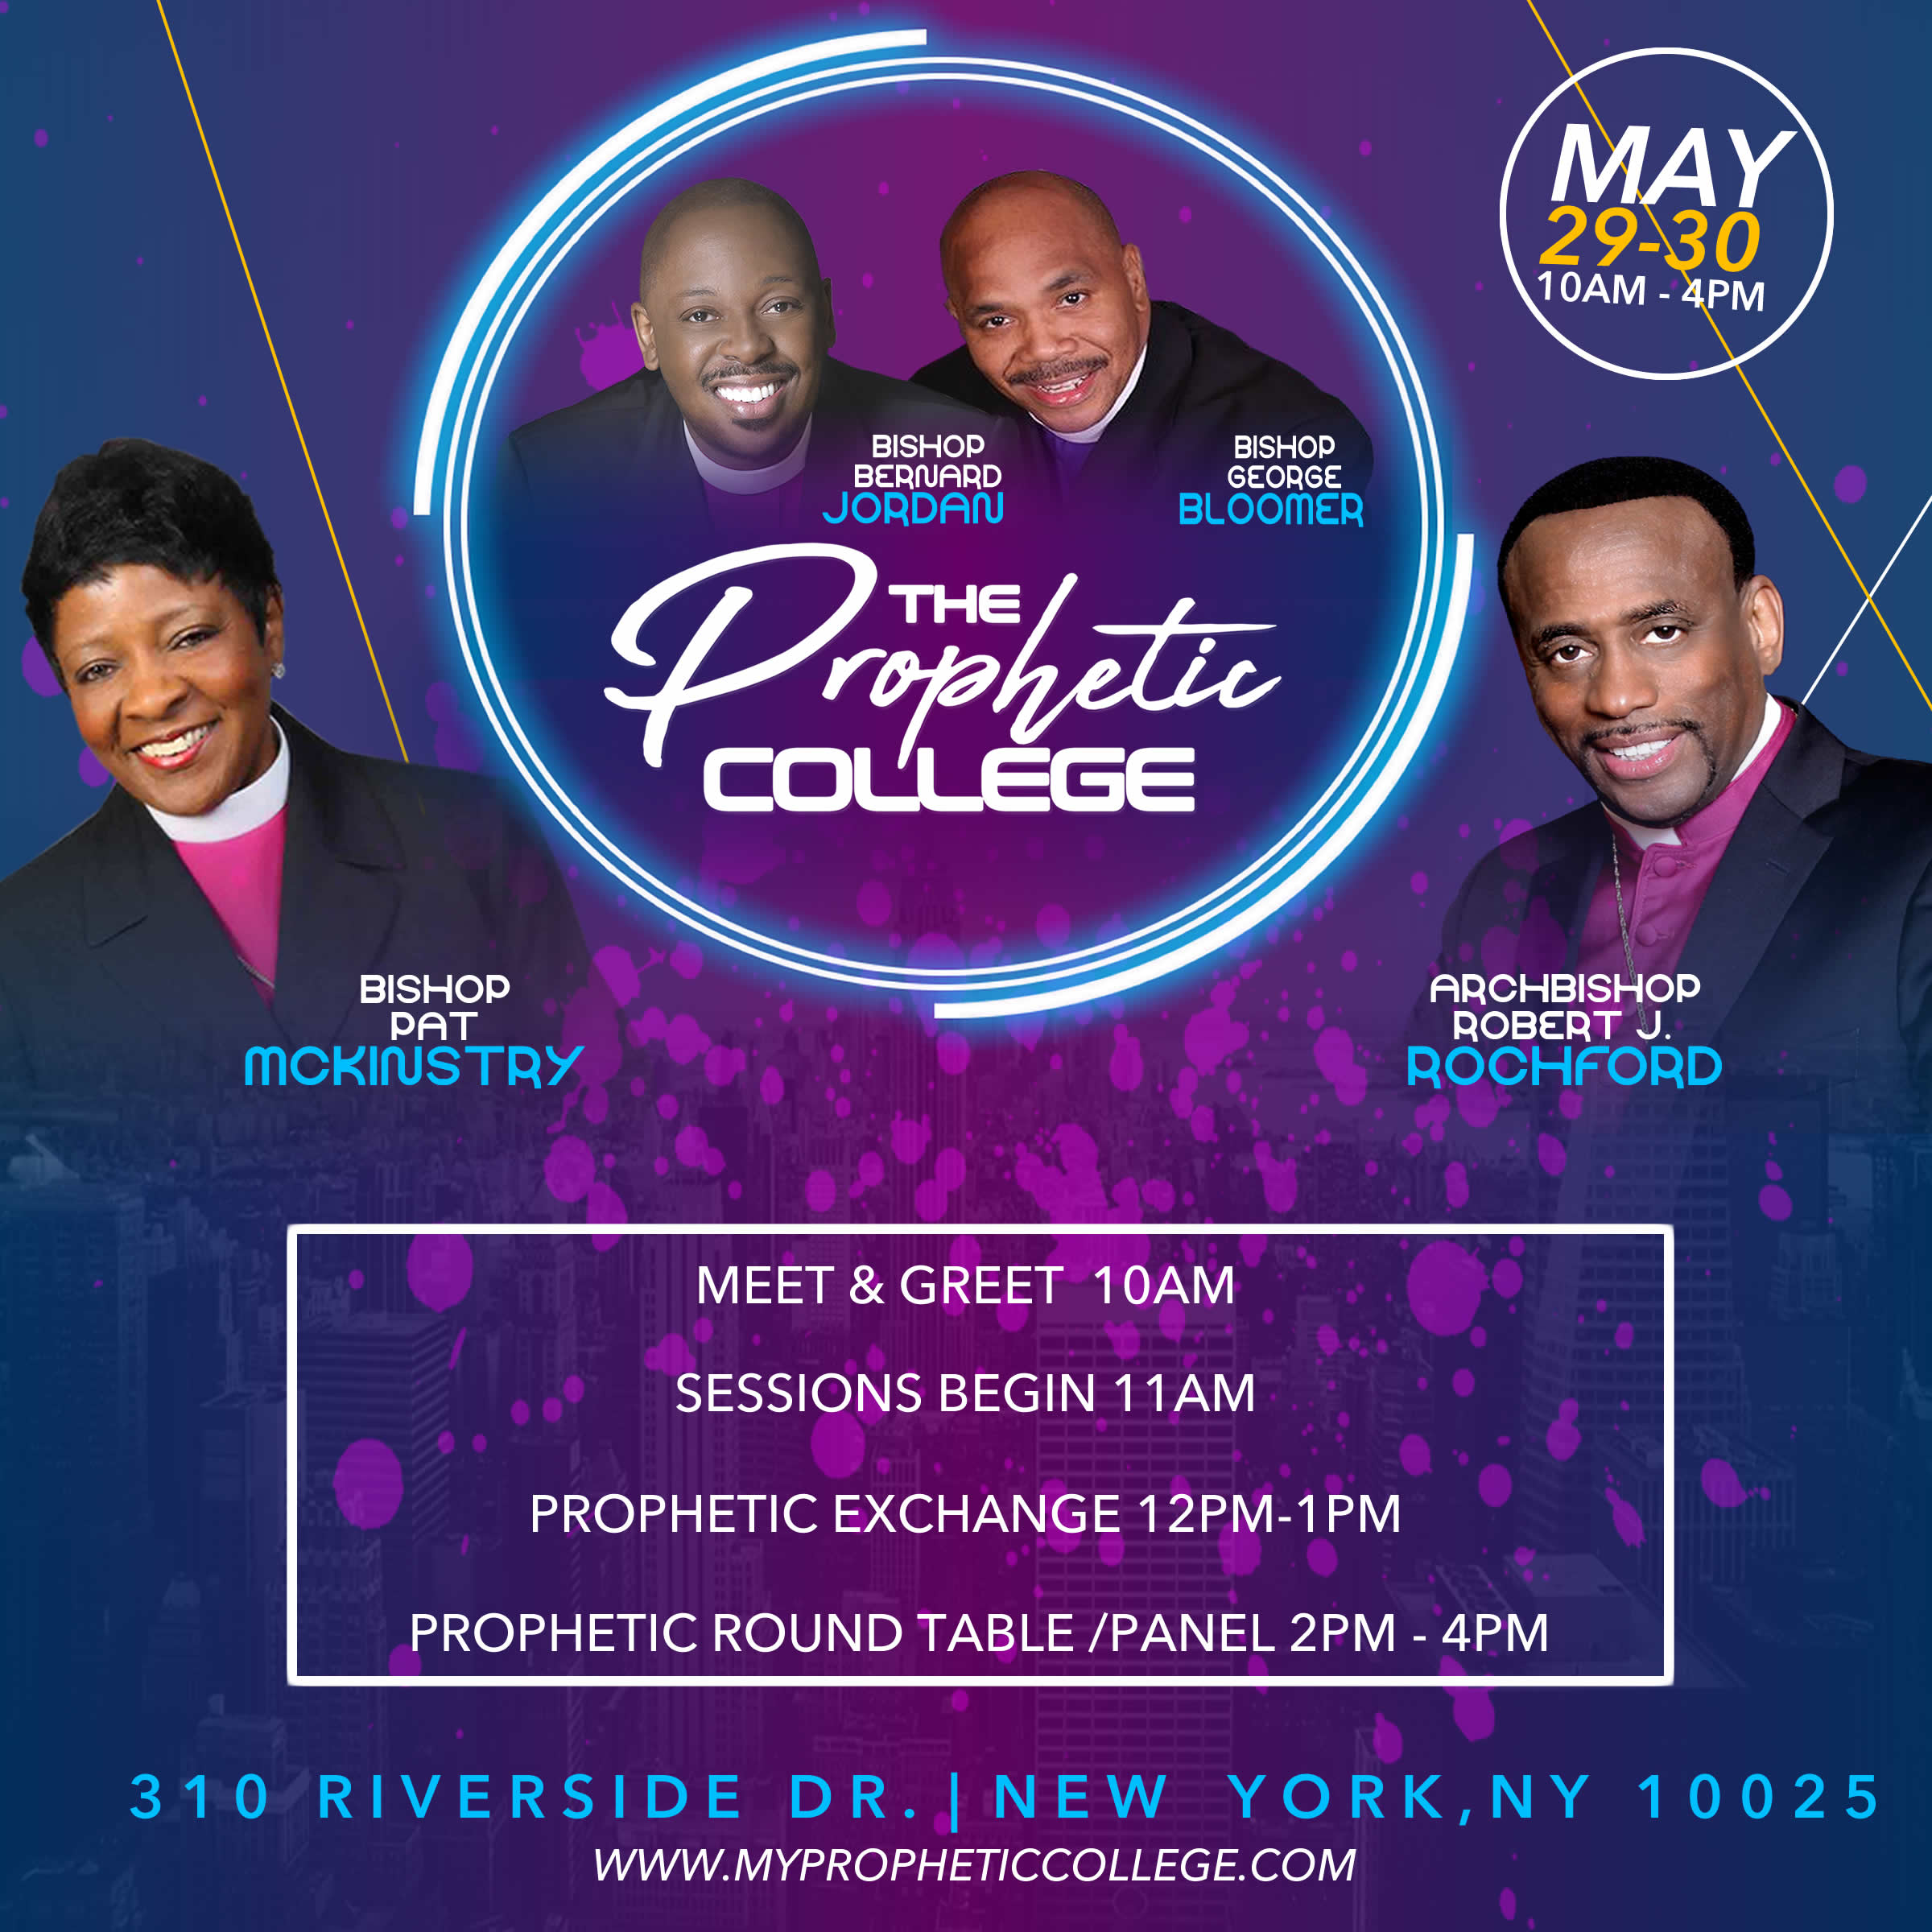 Prophetic College May 29-30, 2019